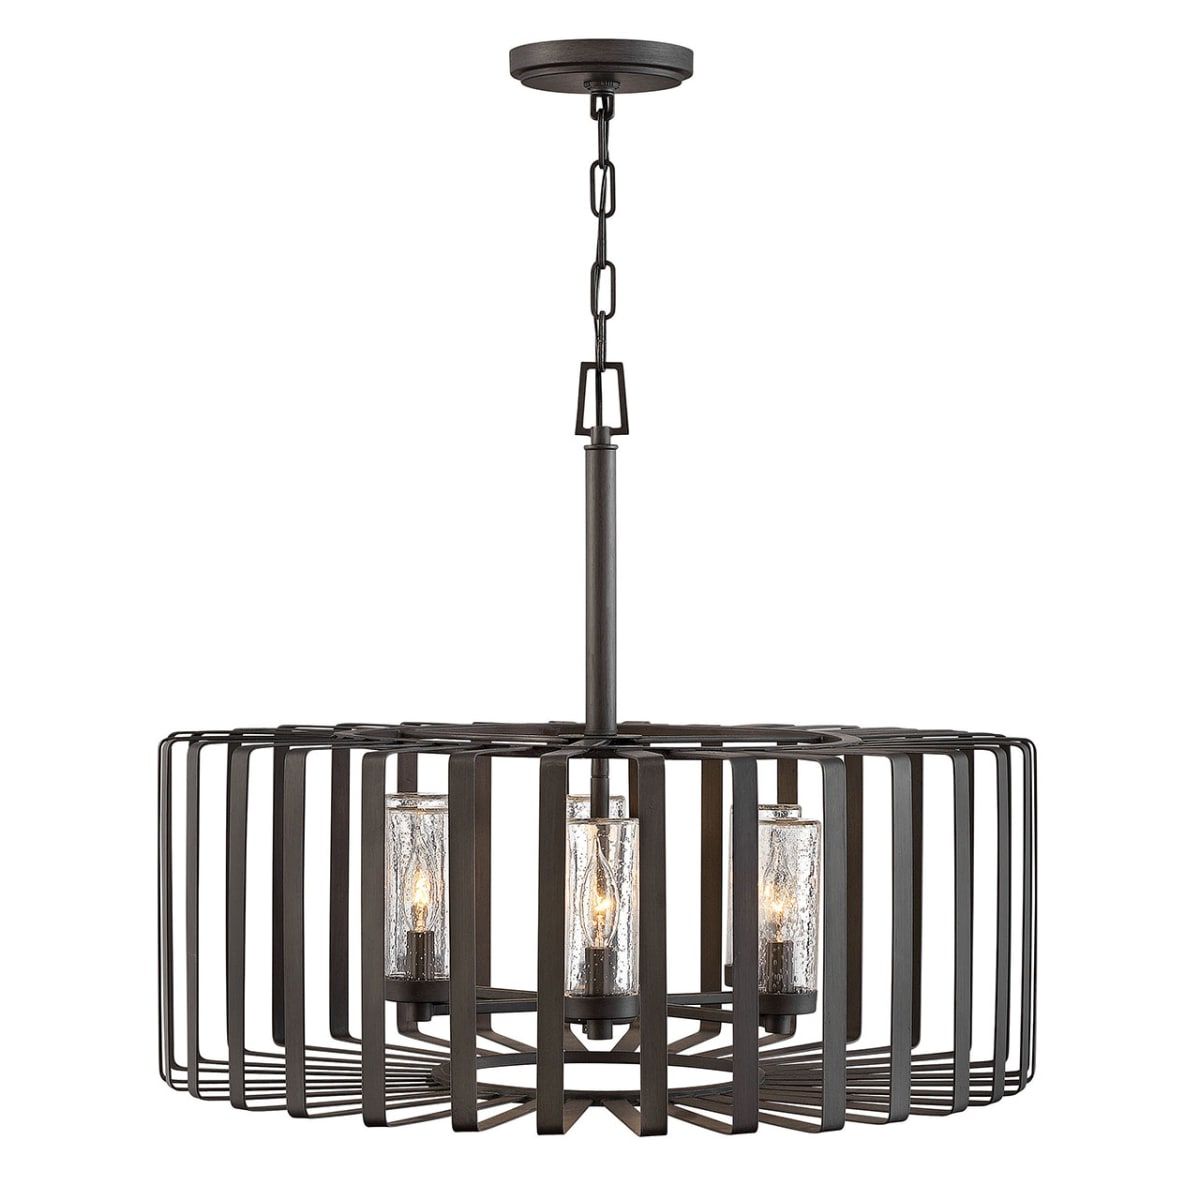 Hinkley Lighting 29505bgr Lv Brushed Graphite Reid 12v 21w 6 Light 28" Wide  Open Air Led Outdoor Taper Candle Chandelier – Lightingdirect Within Favorite Graphite Lantern Chandeliers (View 12 of 15)